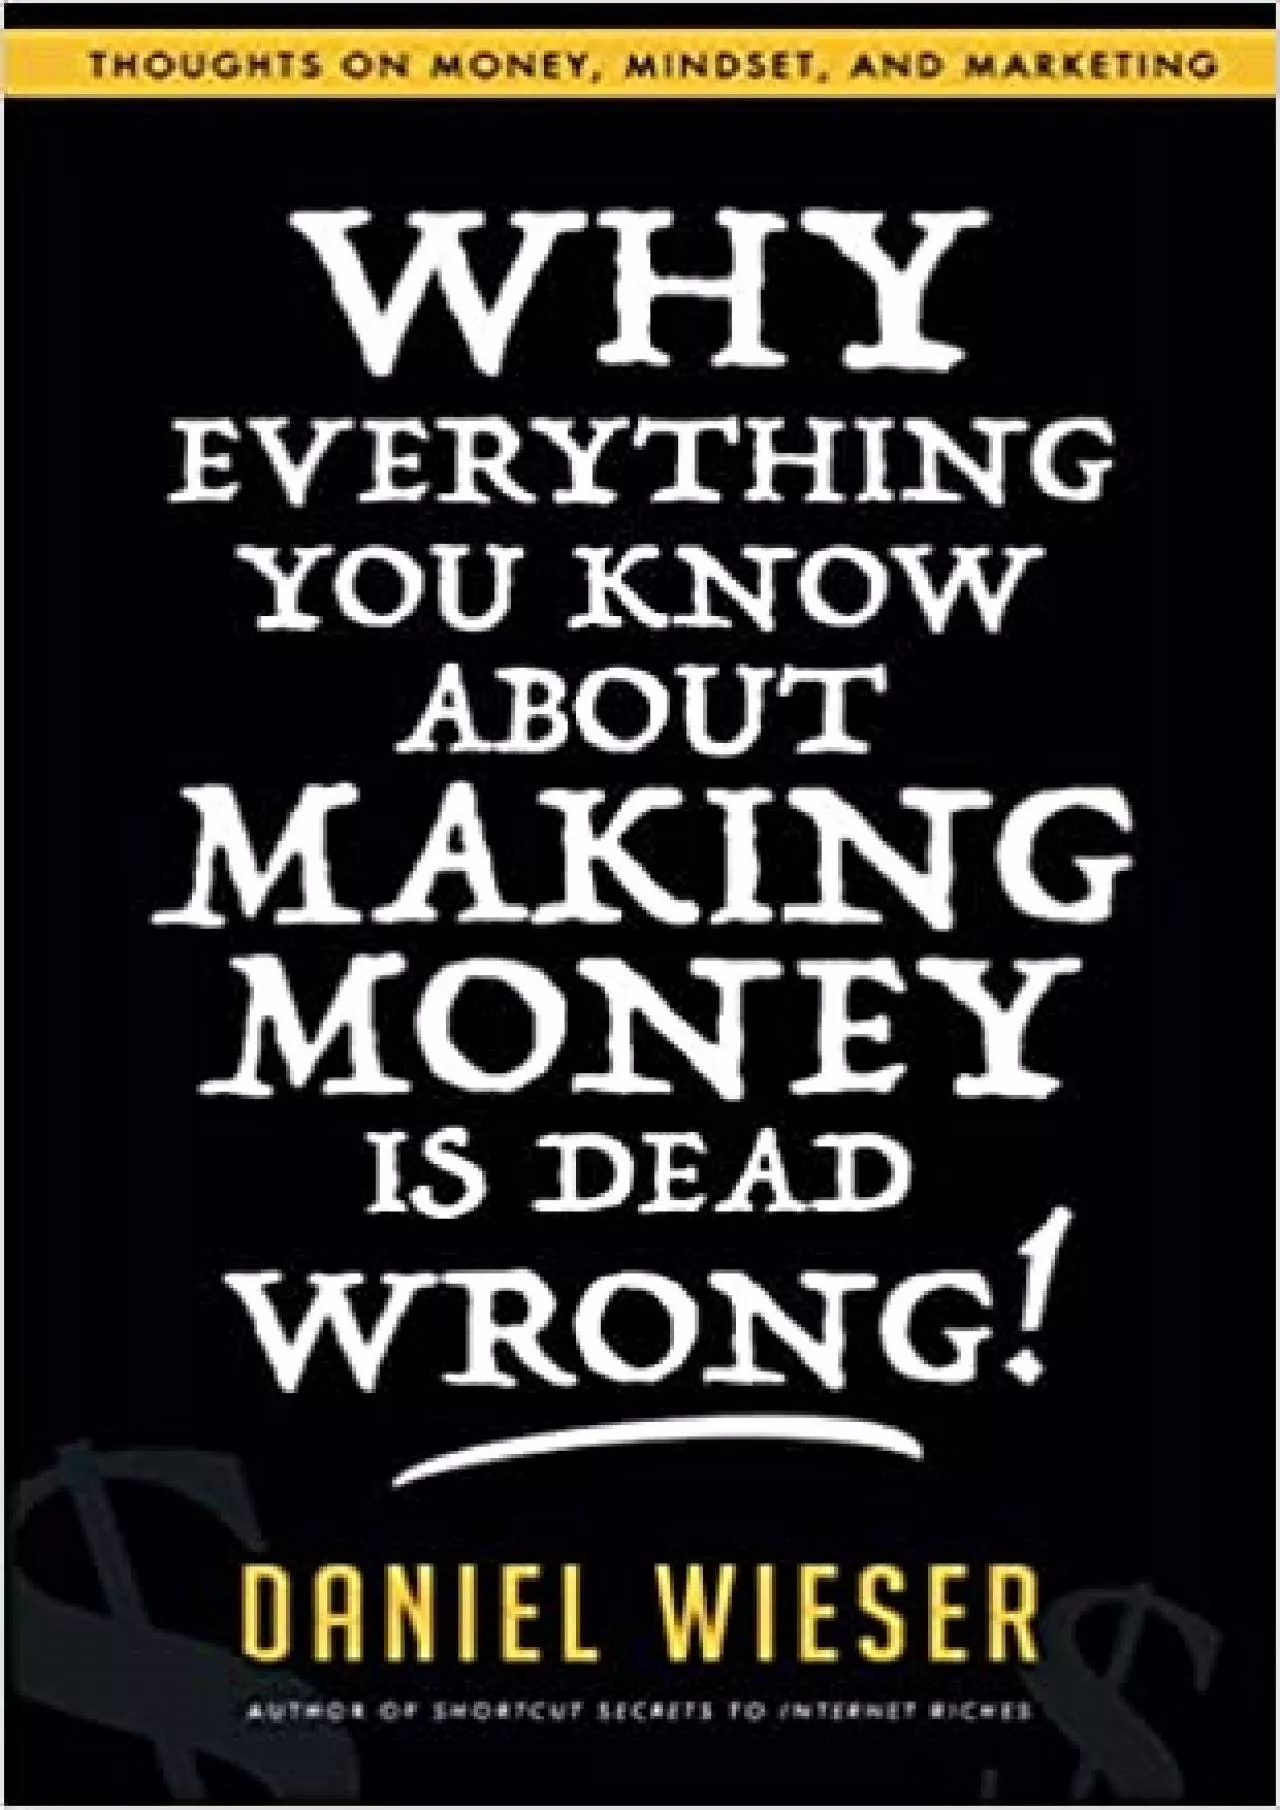 Why Everything You Know About Making Money Is Dead Wrong Thoughts On Money, Mindset, And